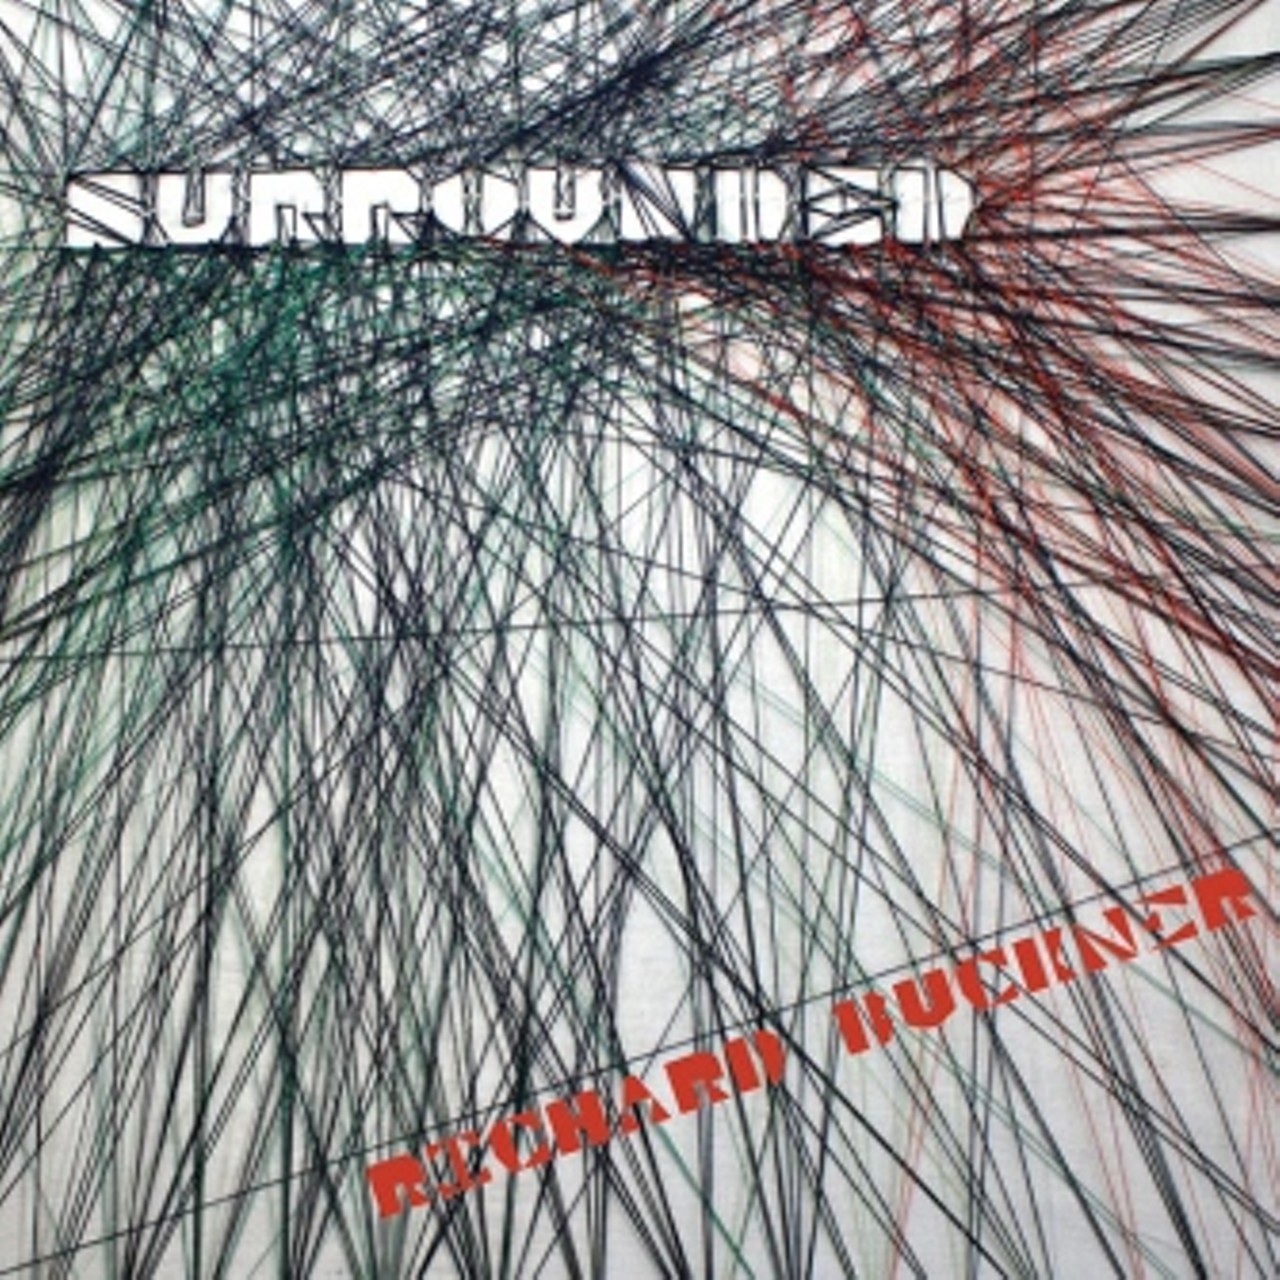 We can&#146;t get enough of the new Richard Buckner album, 'Surrounded.' 
